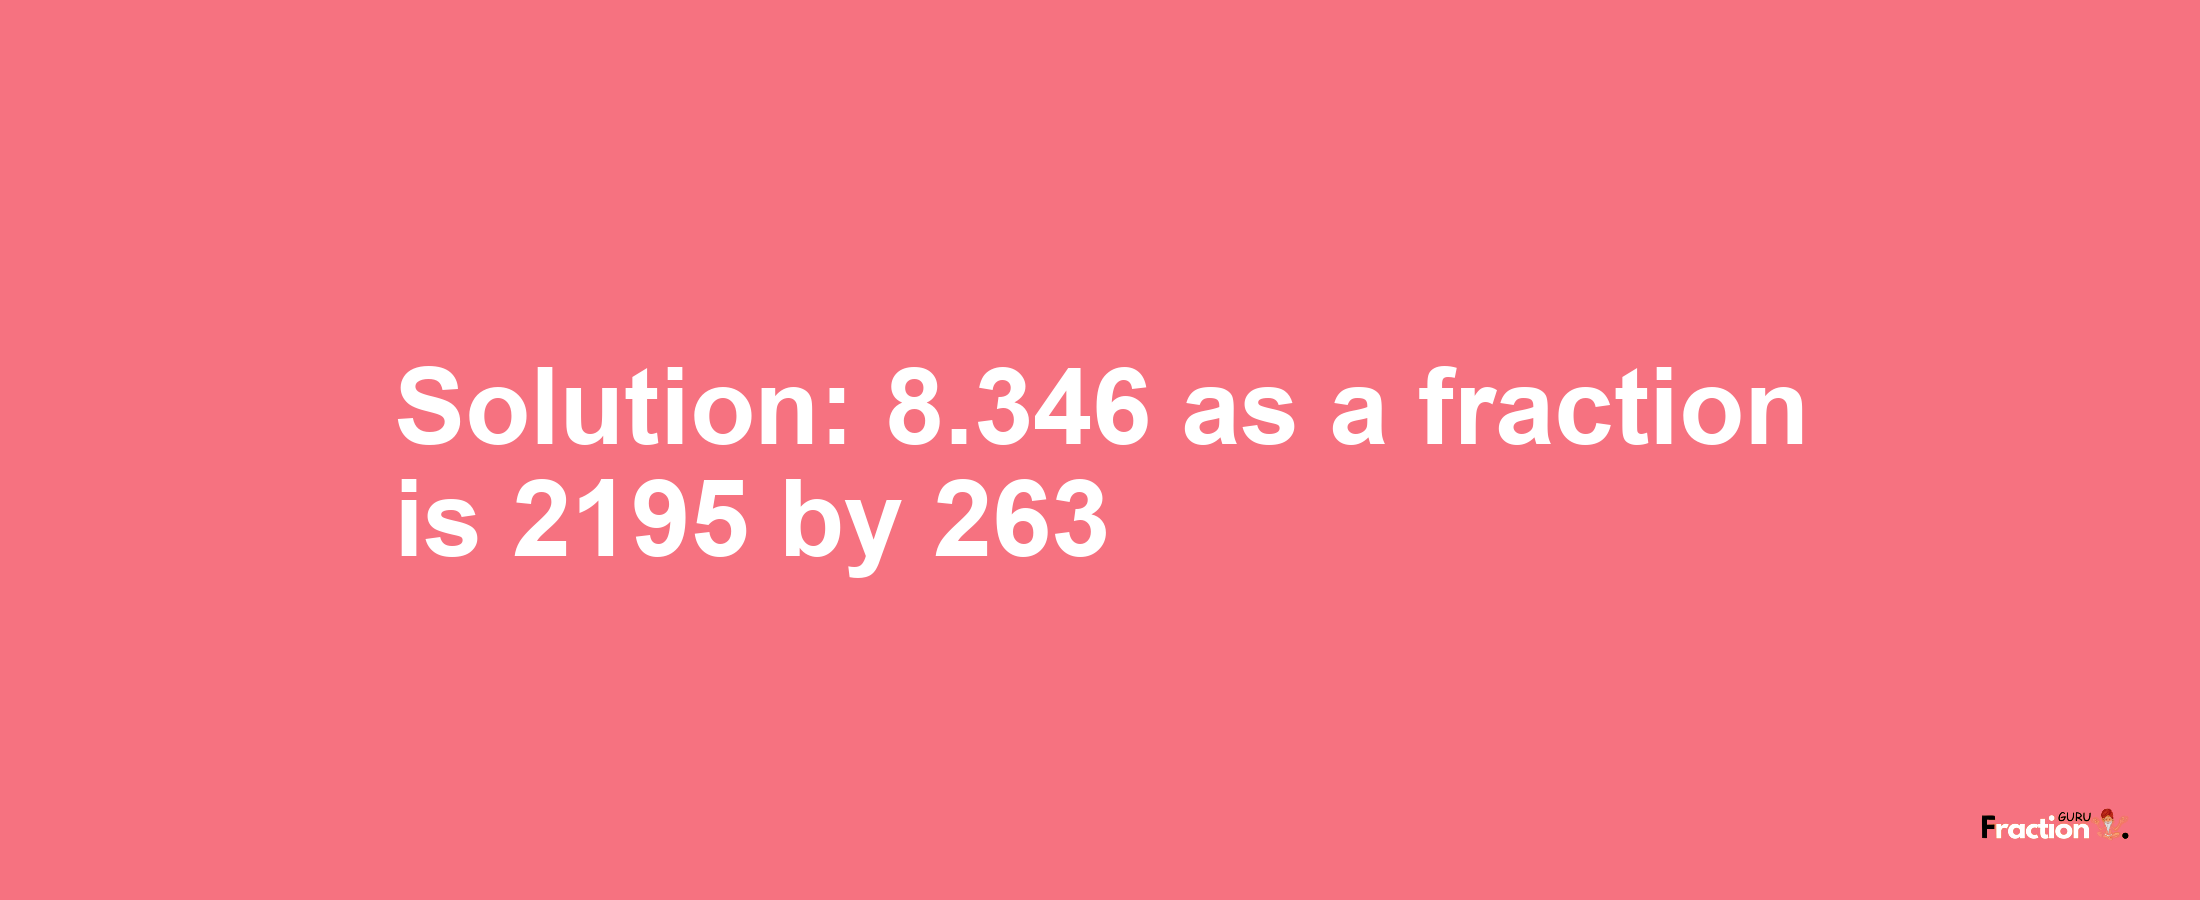 Solution:8.346 as a fraction is 2195/263